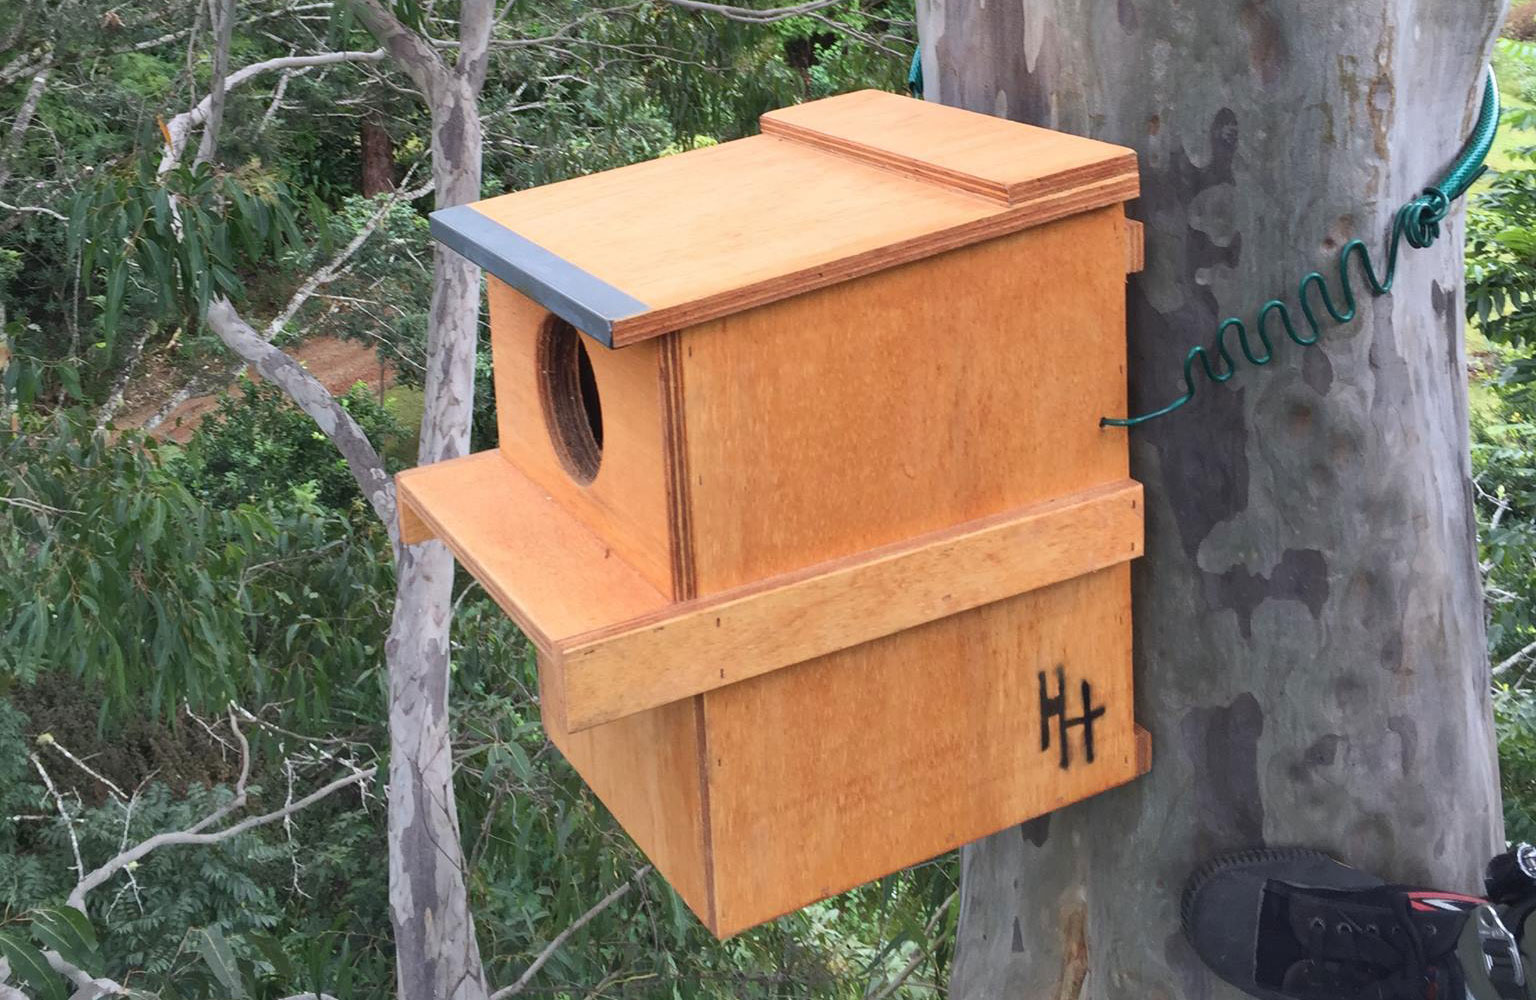 Installing and monitoring Nestboxes with Brunswick Valley Landcare